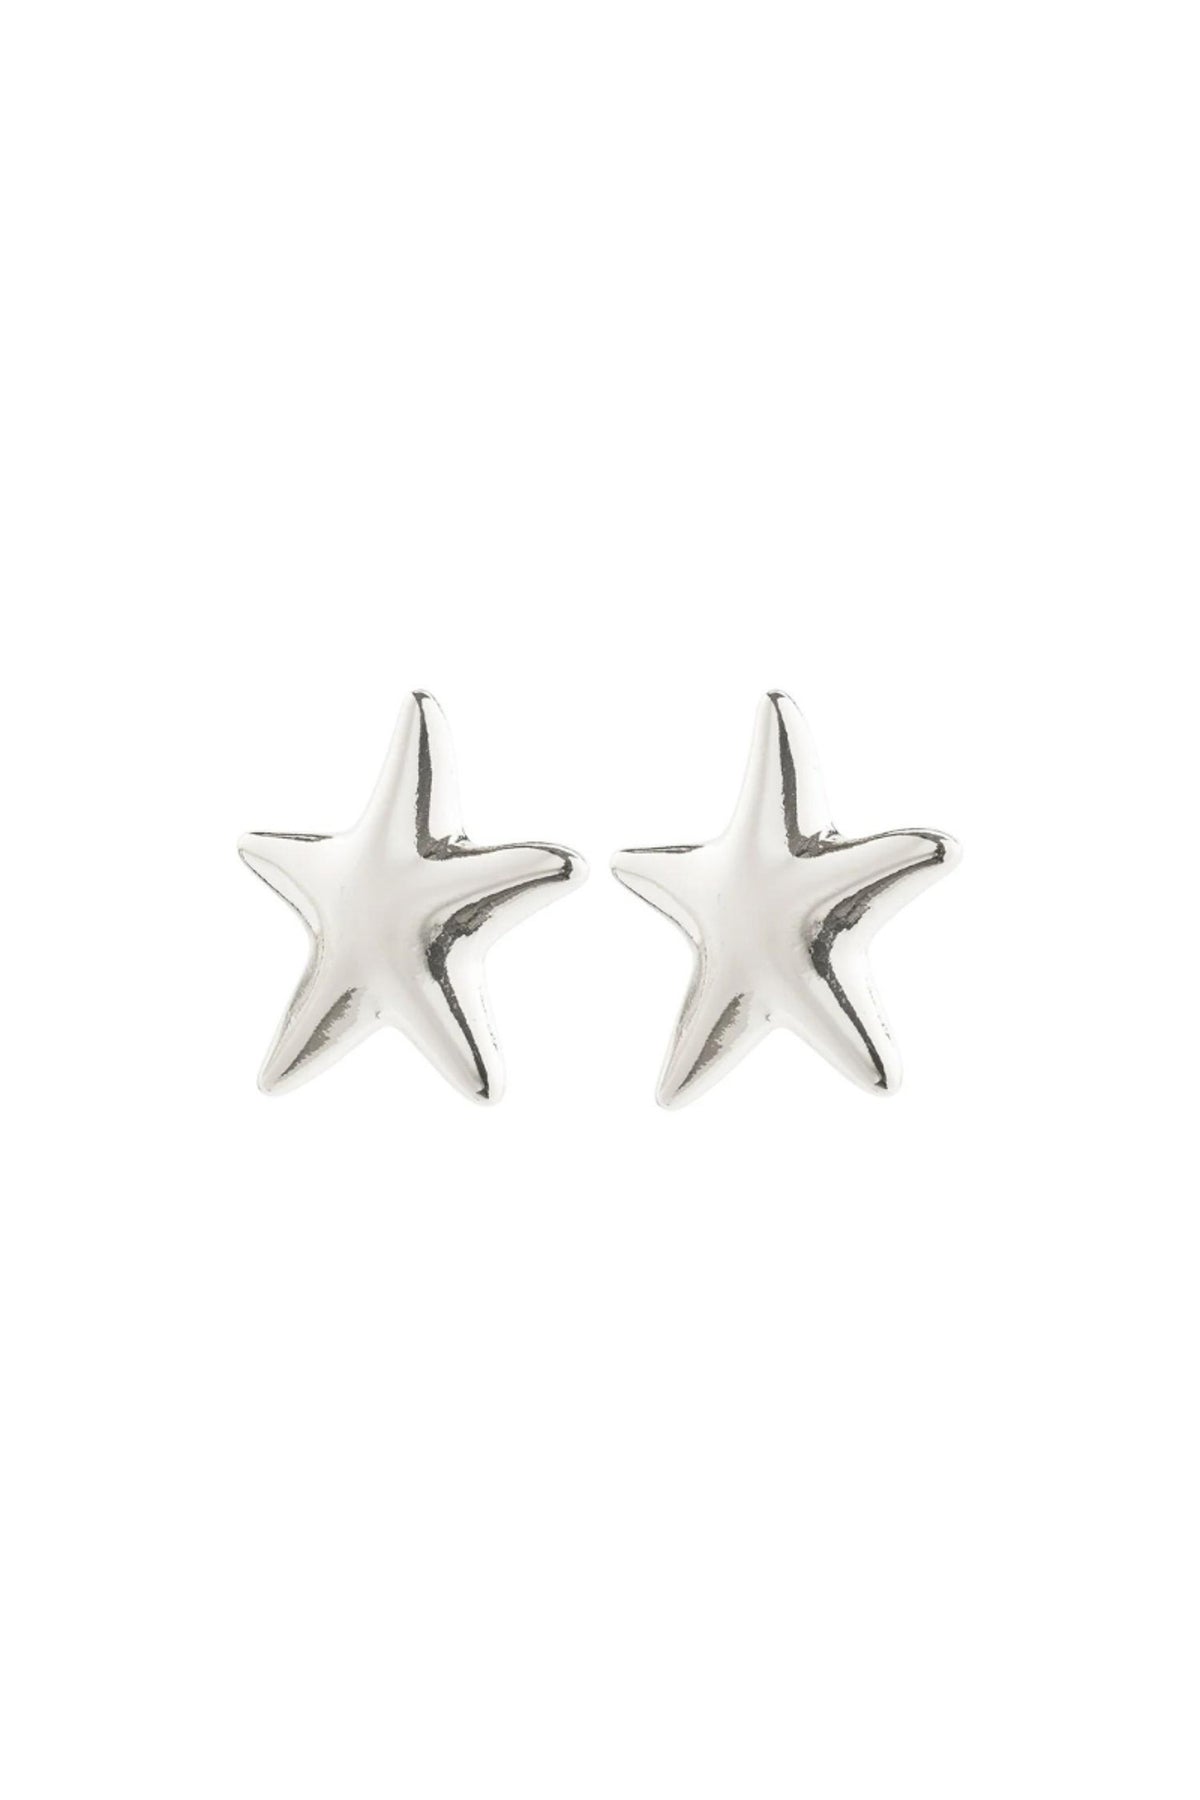 FORCE SILVER PLATED EARRINGS